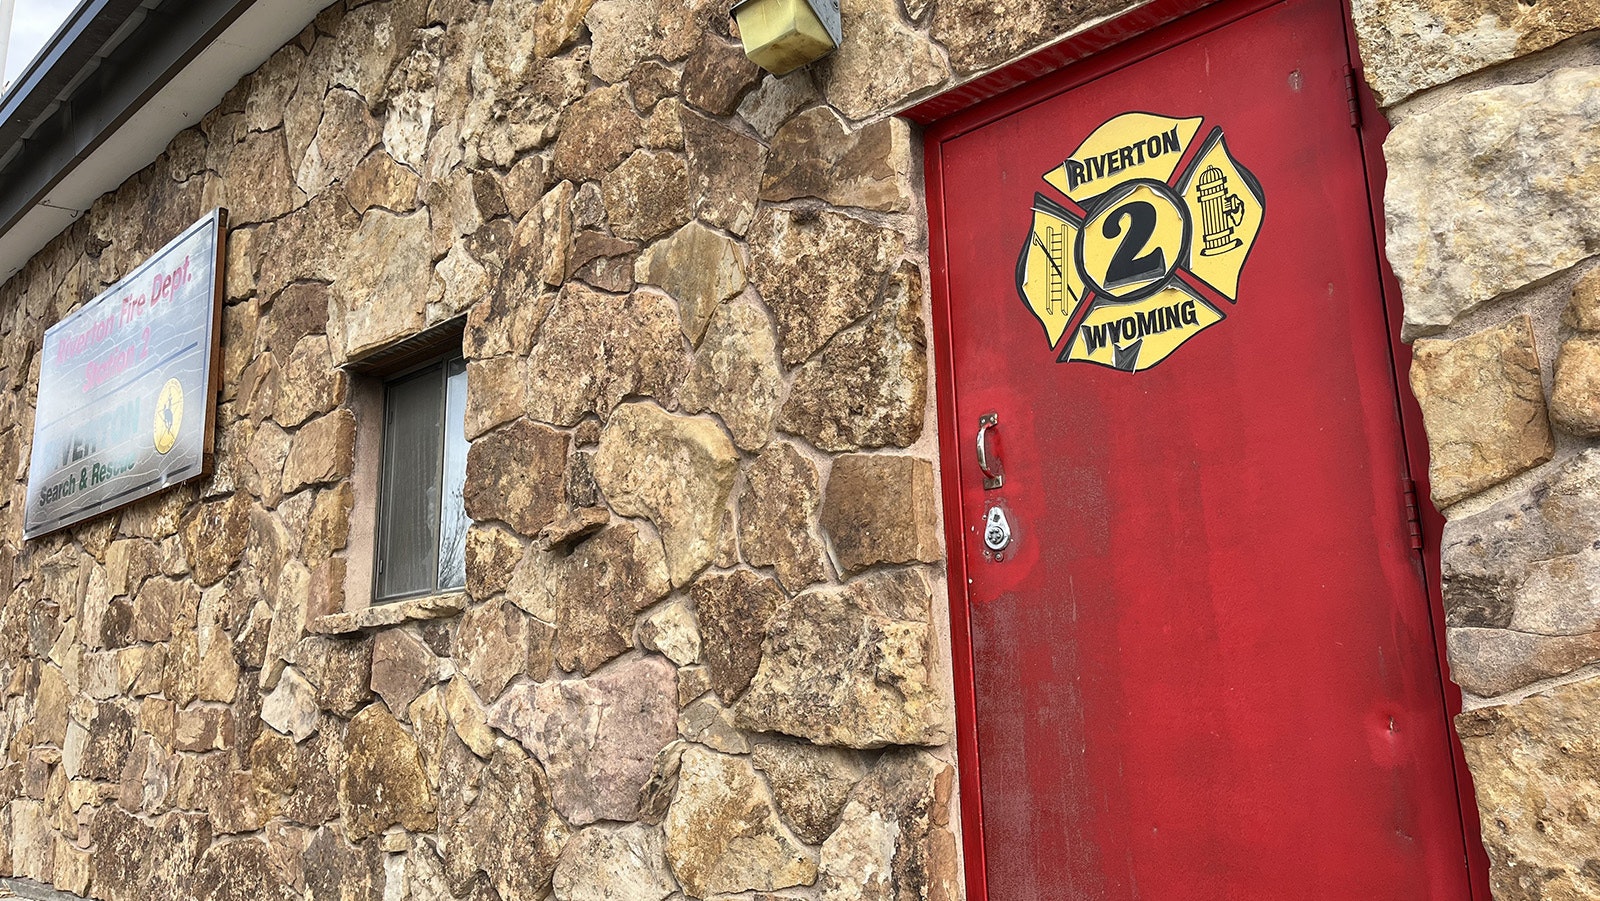 A state task force is discussing possible changes to a Wyoming law that would require people accepting babies surrendered at "safe havens," like fire stations, to ask if the babies are American Indian.